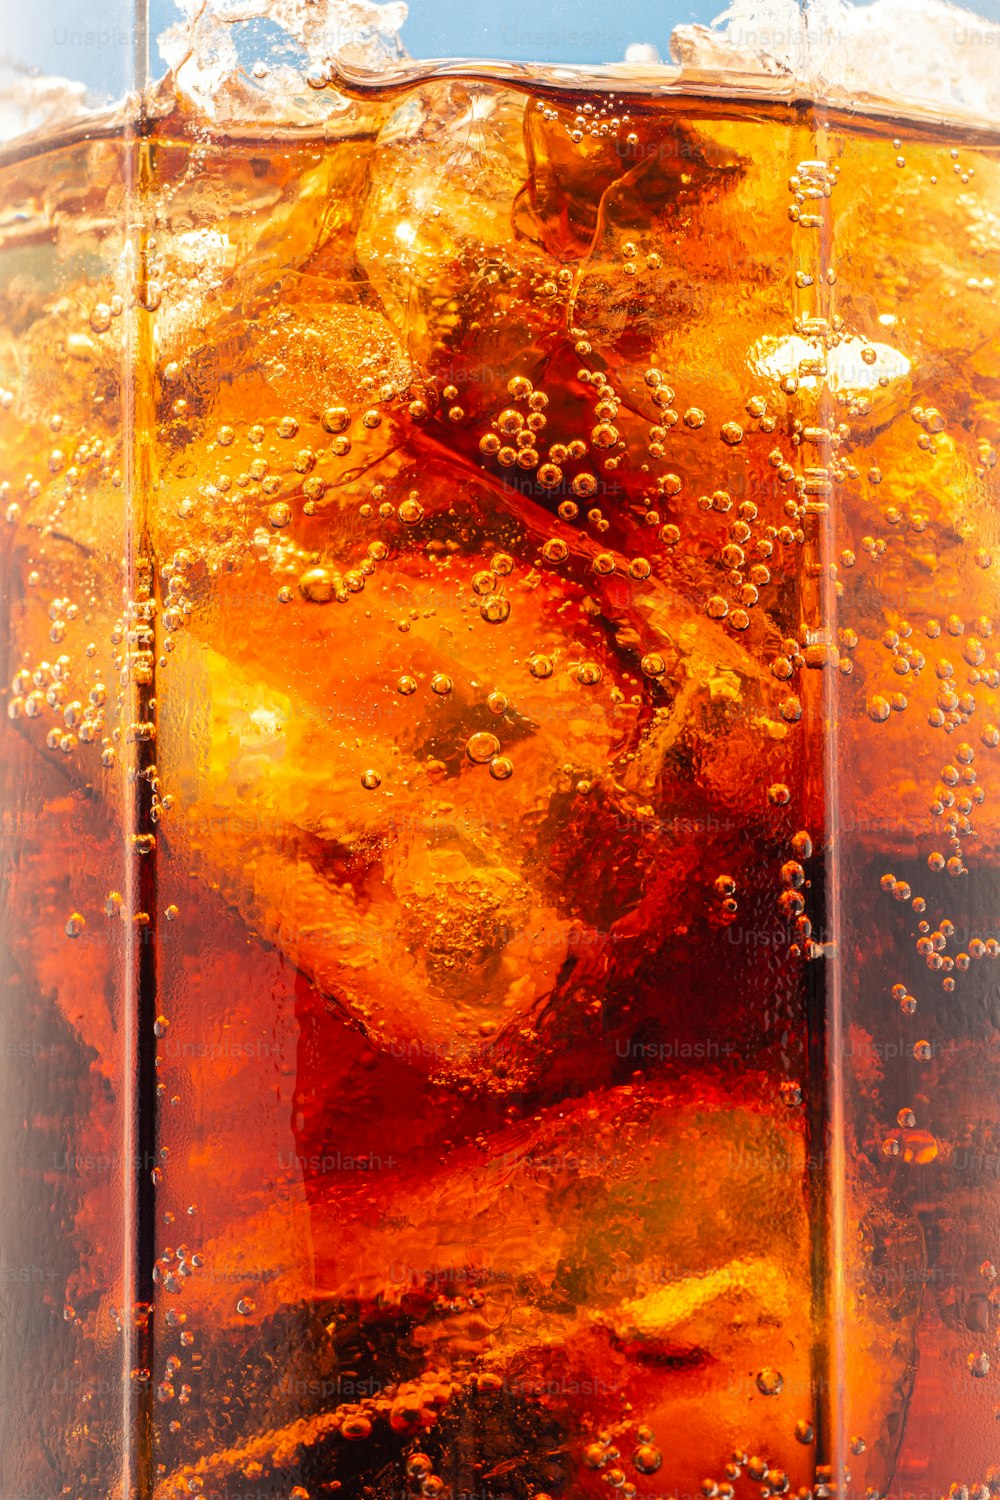 Fizz Sparkling Cola Water Refreshing Bubbly Soda Pop With Ice Cubes Cold  Soft Drink Cola Carbonated Liquid Fresh And Cool Iced Drink In A Glasses  Refreshing And Quench Thirst Concept Stock Photo 